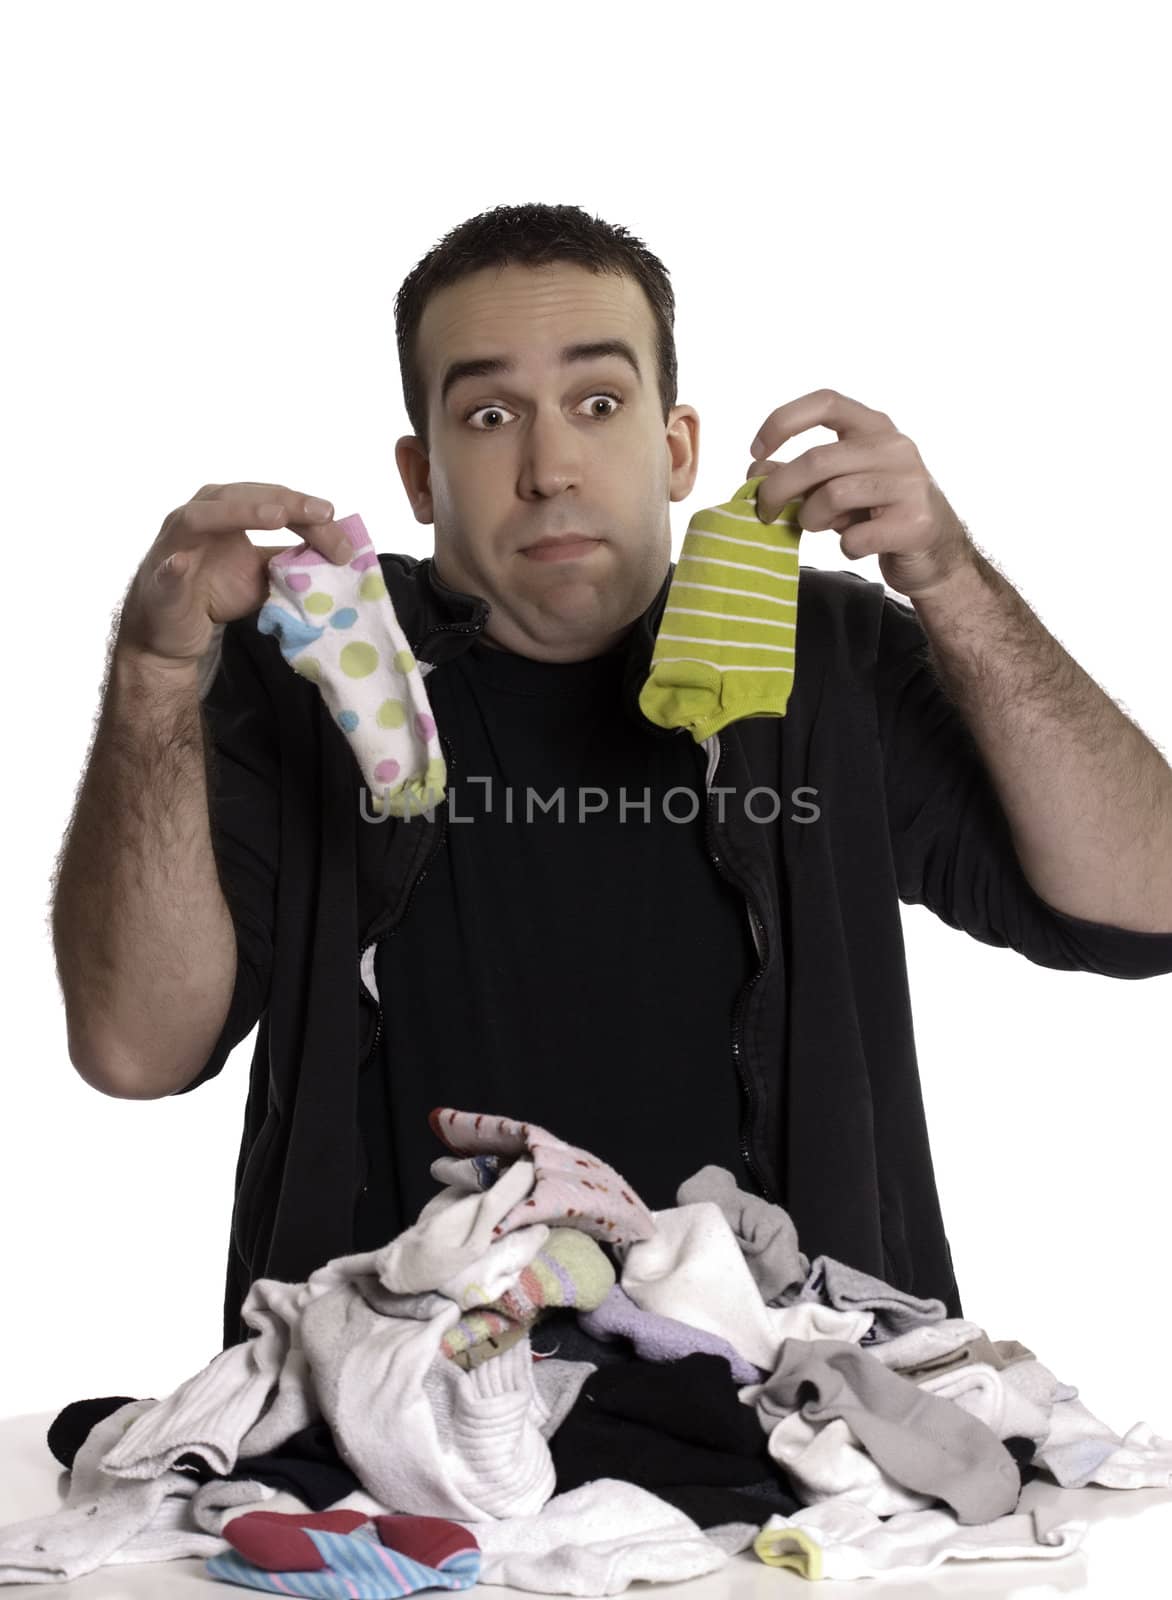 A young man doesn't know how to match socks, isolated against a white background